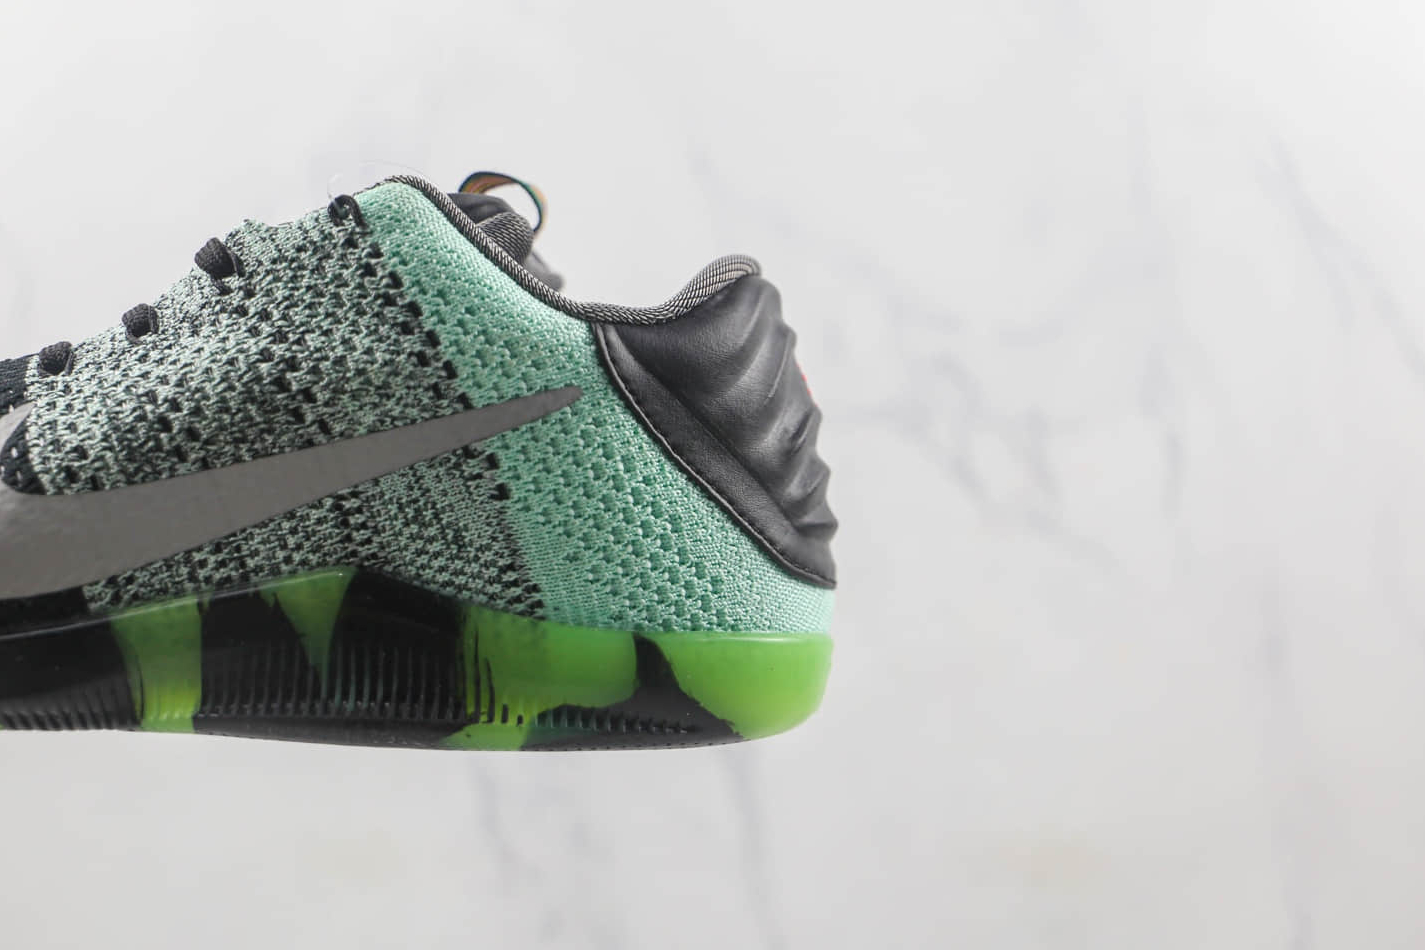 Nike Kobe 11 Elite Low All Star Northern Lights 822521-305 | Limited Edition Basketball Shoes